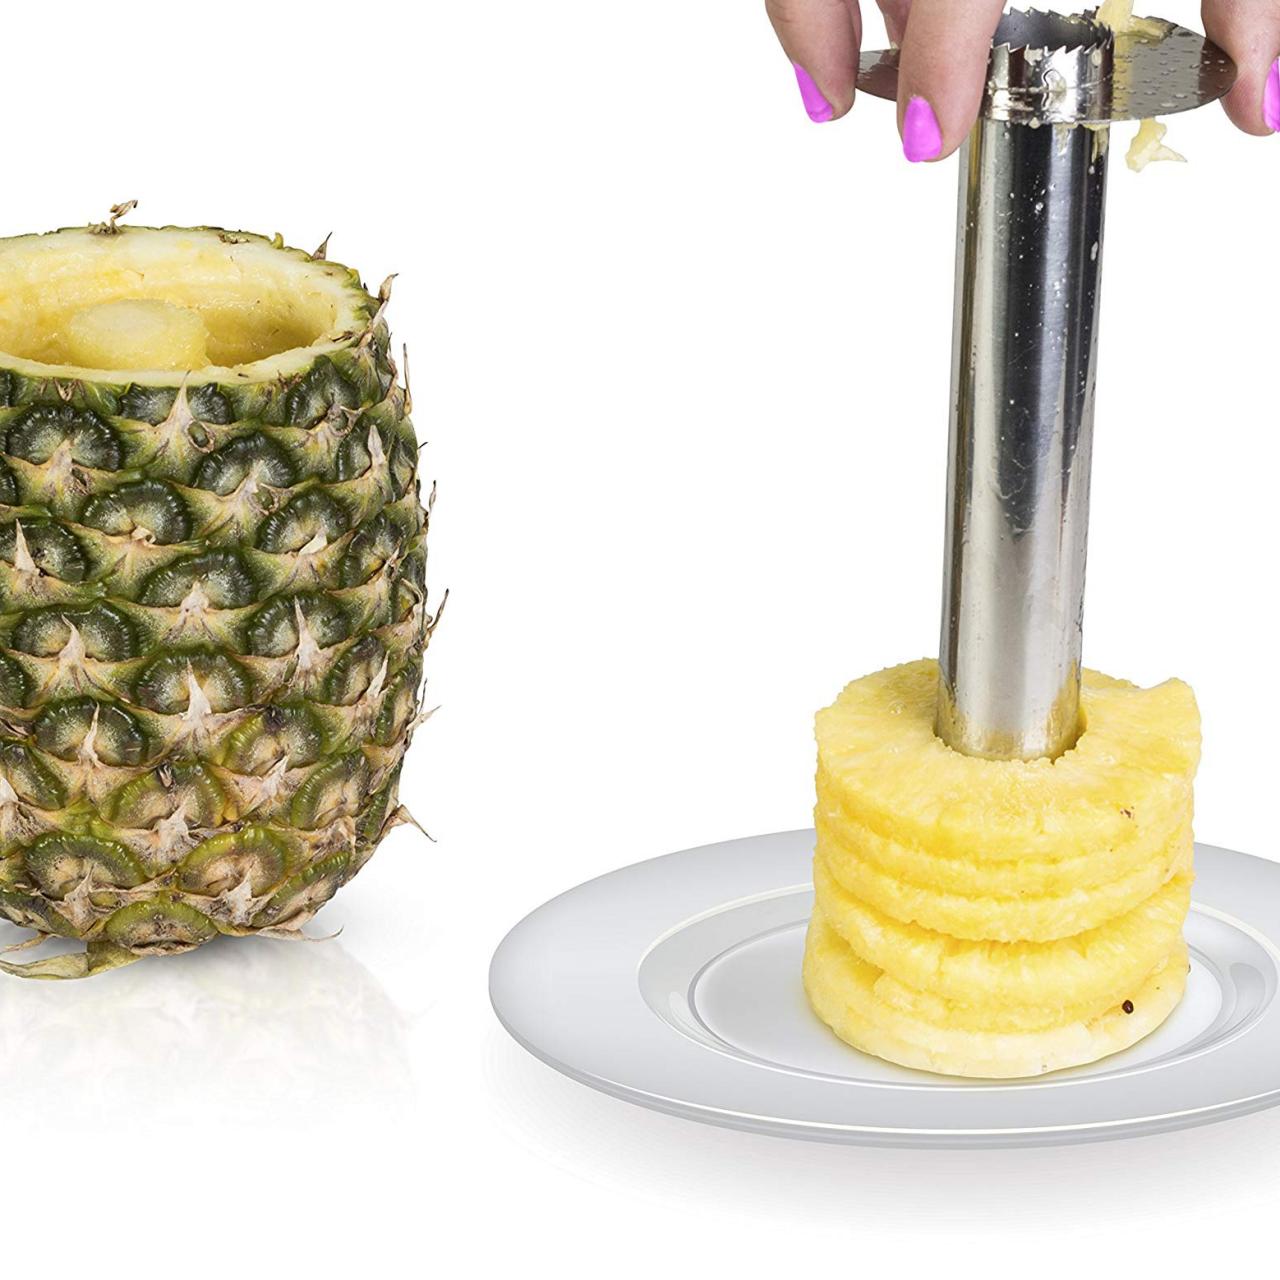 https://food.fnr.sndimg.com/content/dam/images/food/products/2019/9/11/rx_chefland-stainless-steel-pineapple-corer.jpeg.rend.hgtvcom.1280.1280.suffix/1568217412424.jpeg